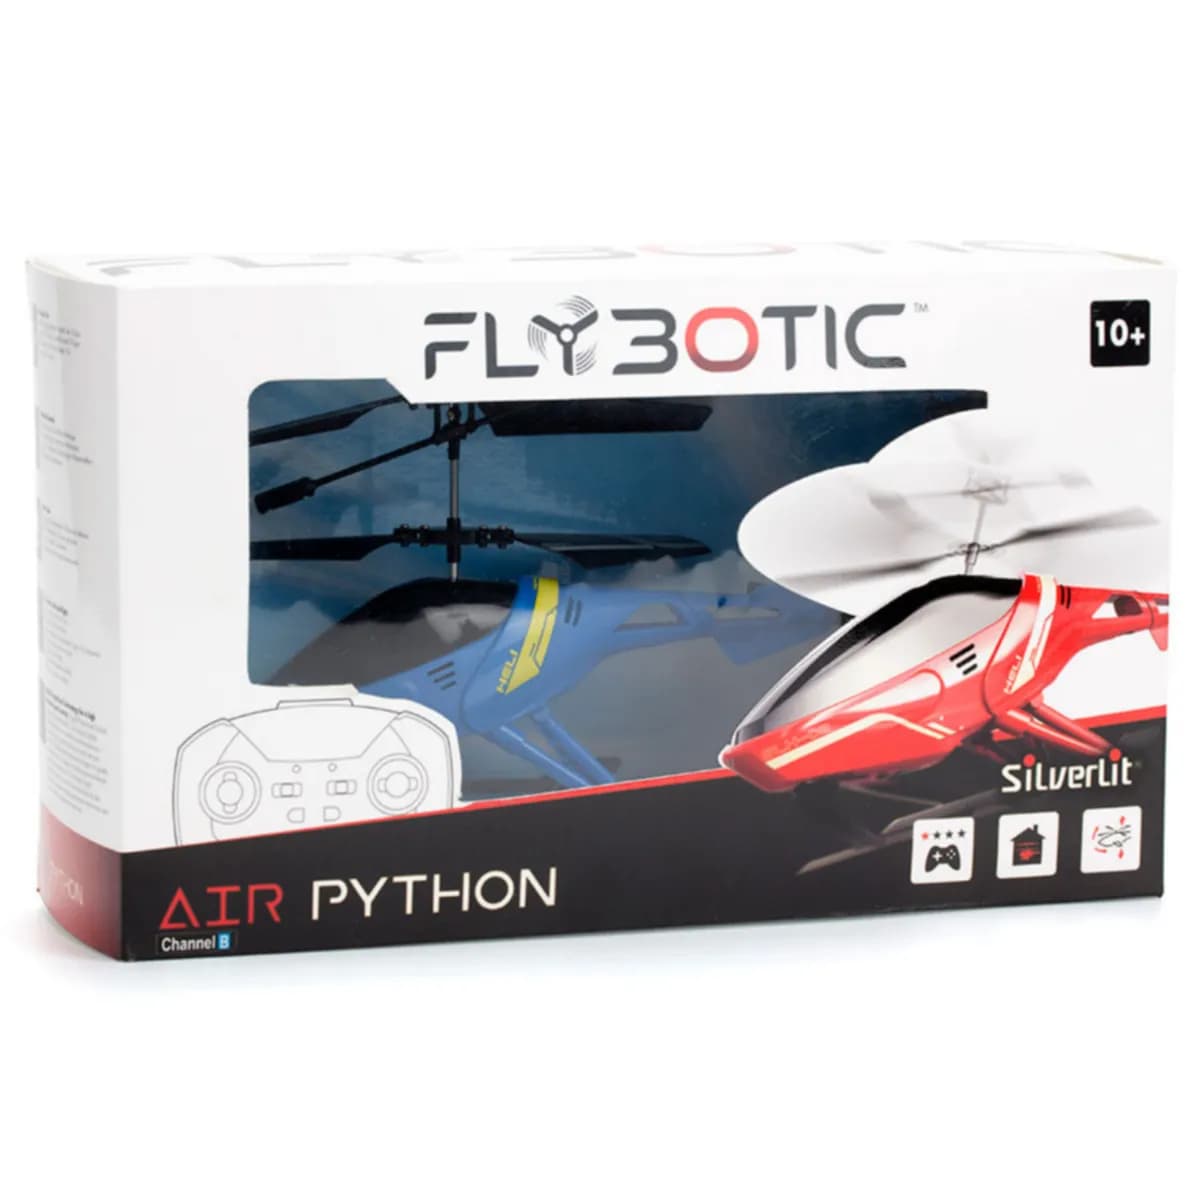 Silverlit Flybotic Air Python Remote Control  Helicopter Toy For Kids - DEFS08